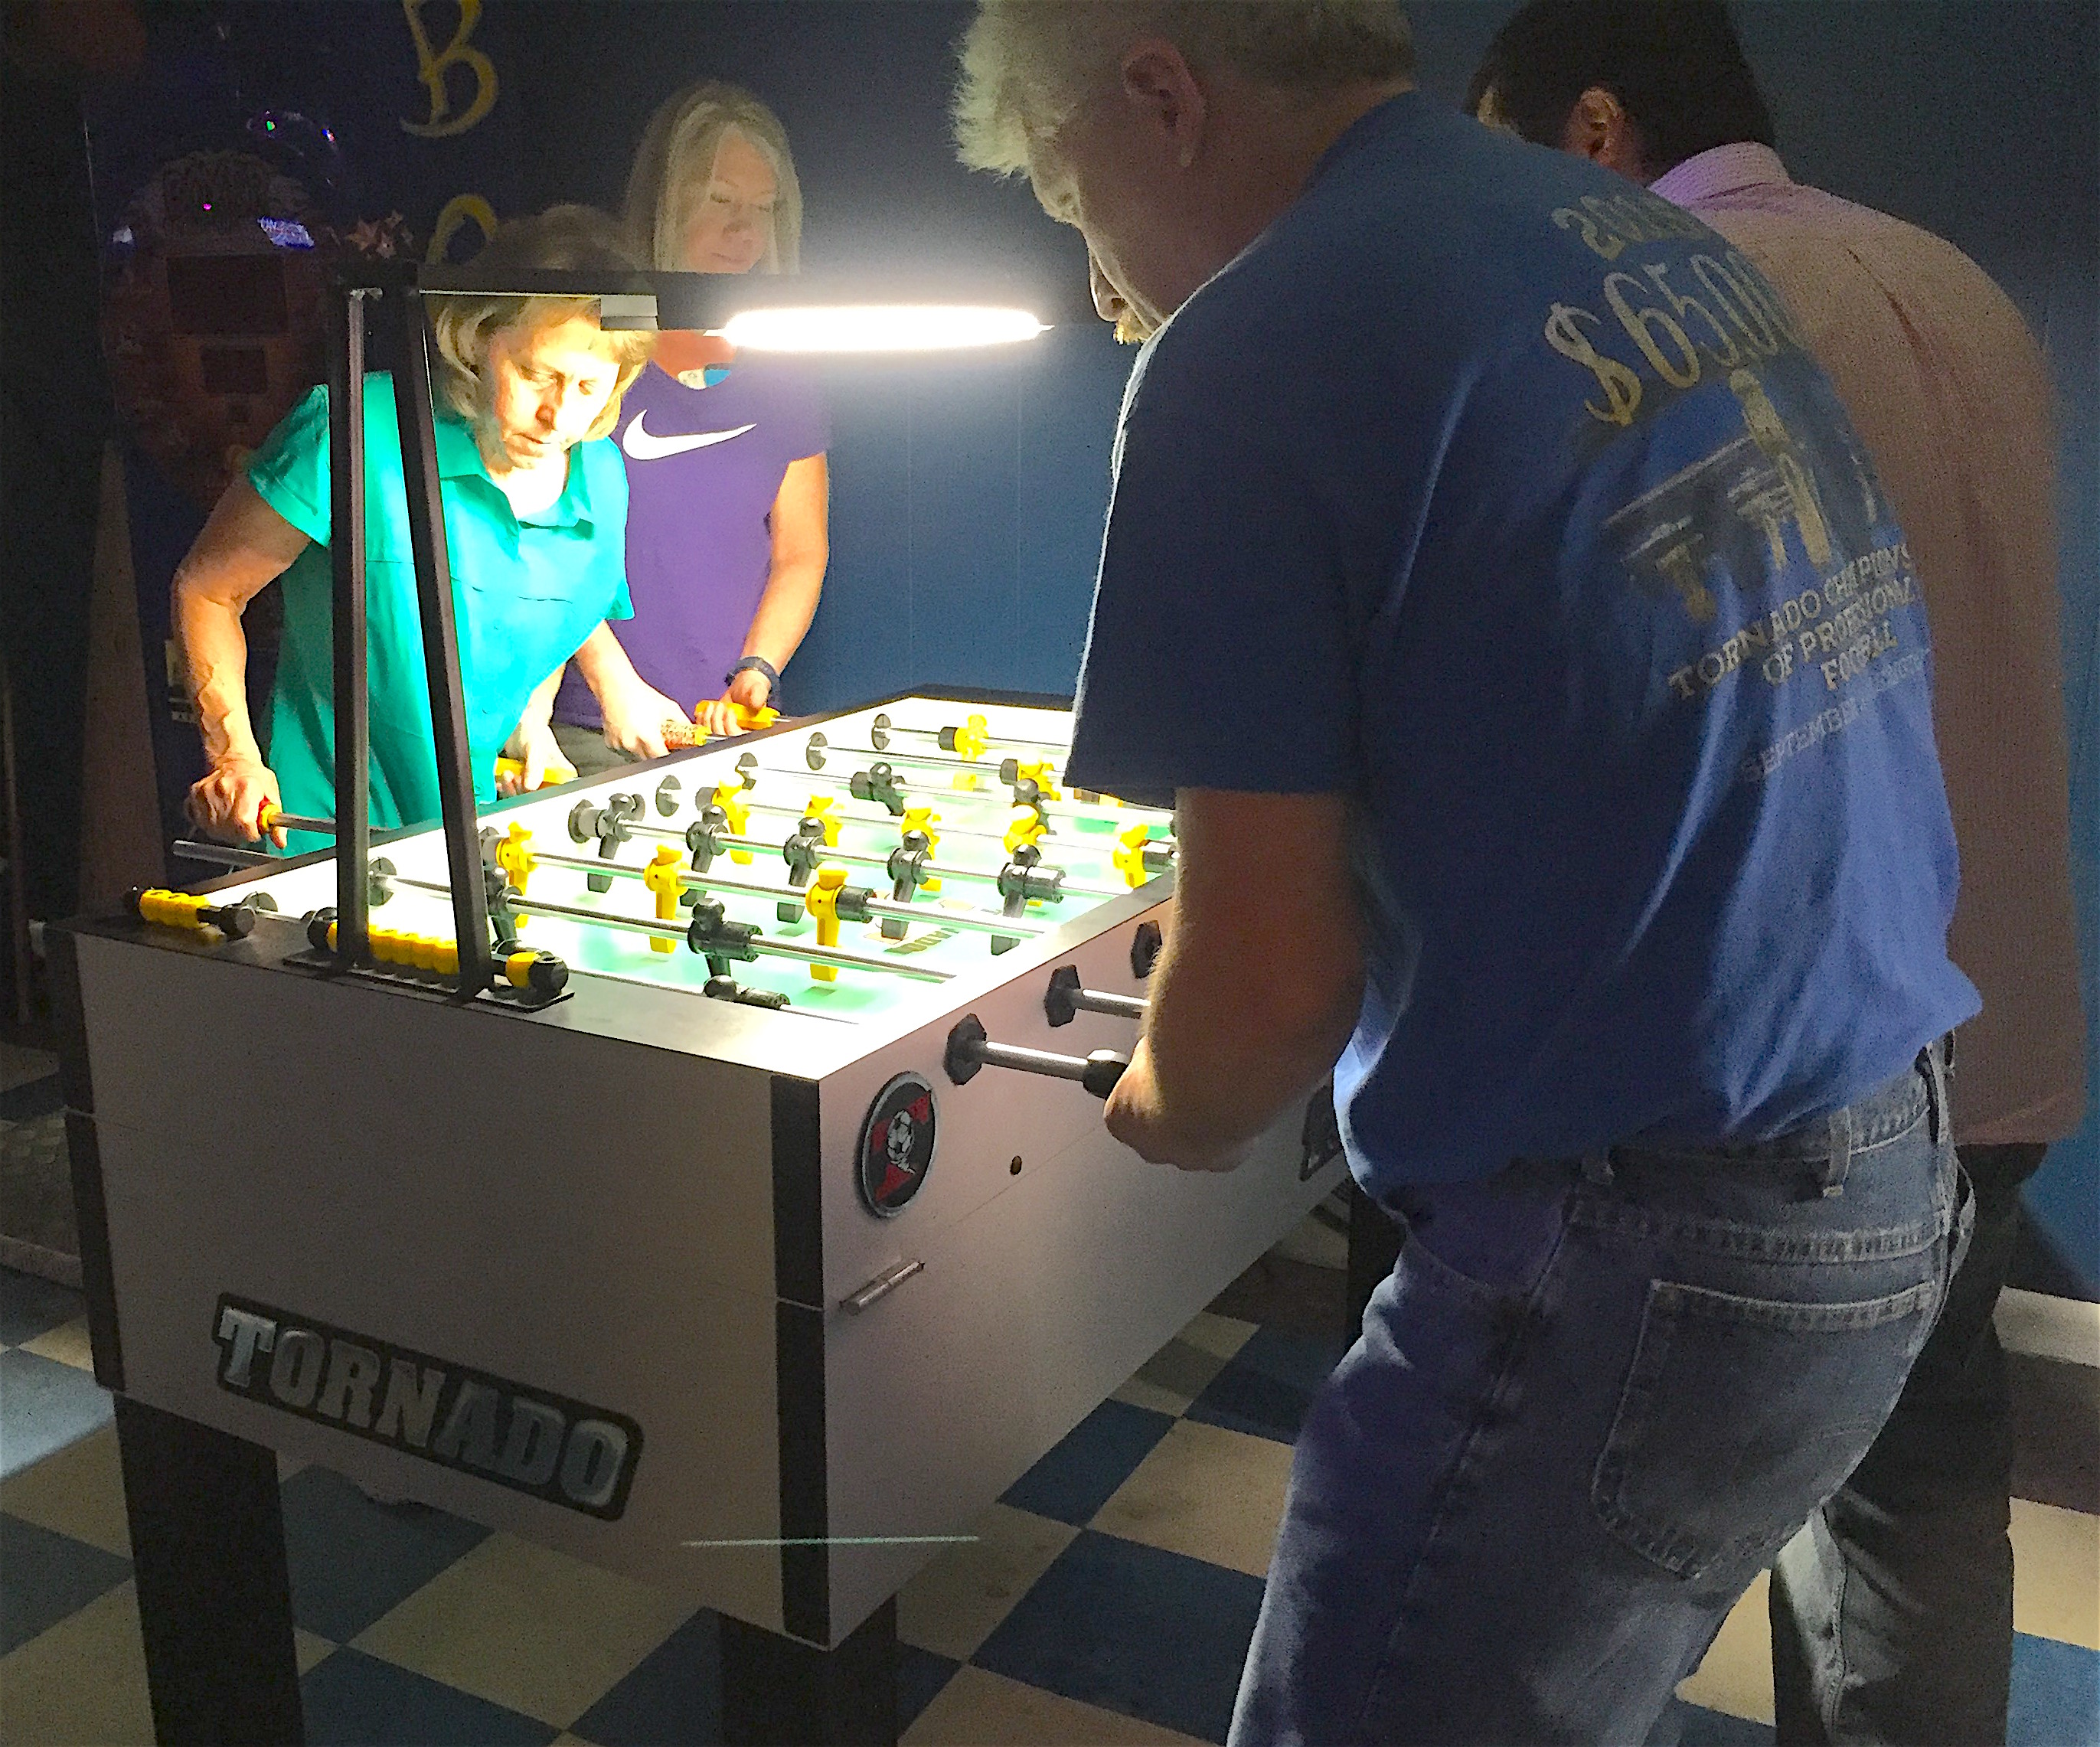 Foosball players competing in Cullman at the North Alabama Open foosball tournament.